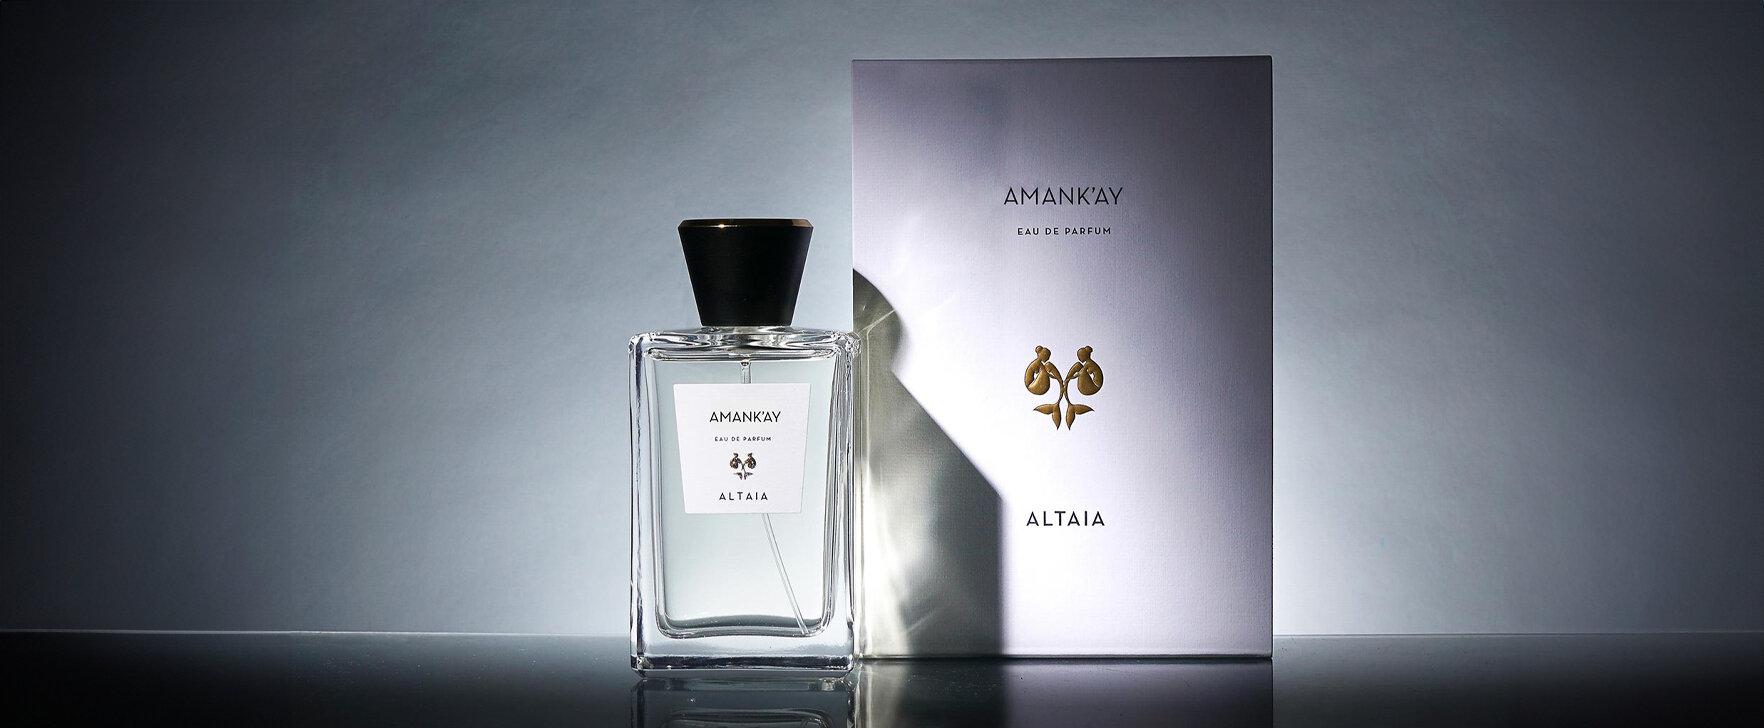 The New Unisex Fragrance "Amank'Ay" by Altaia: A Scented Journey Through Patagonia